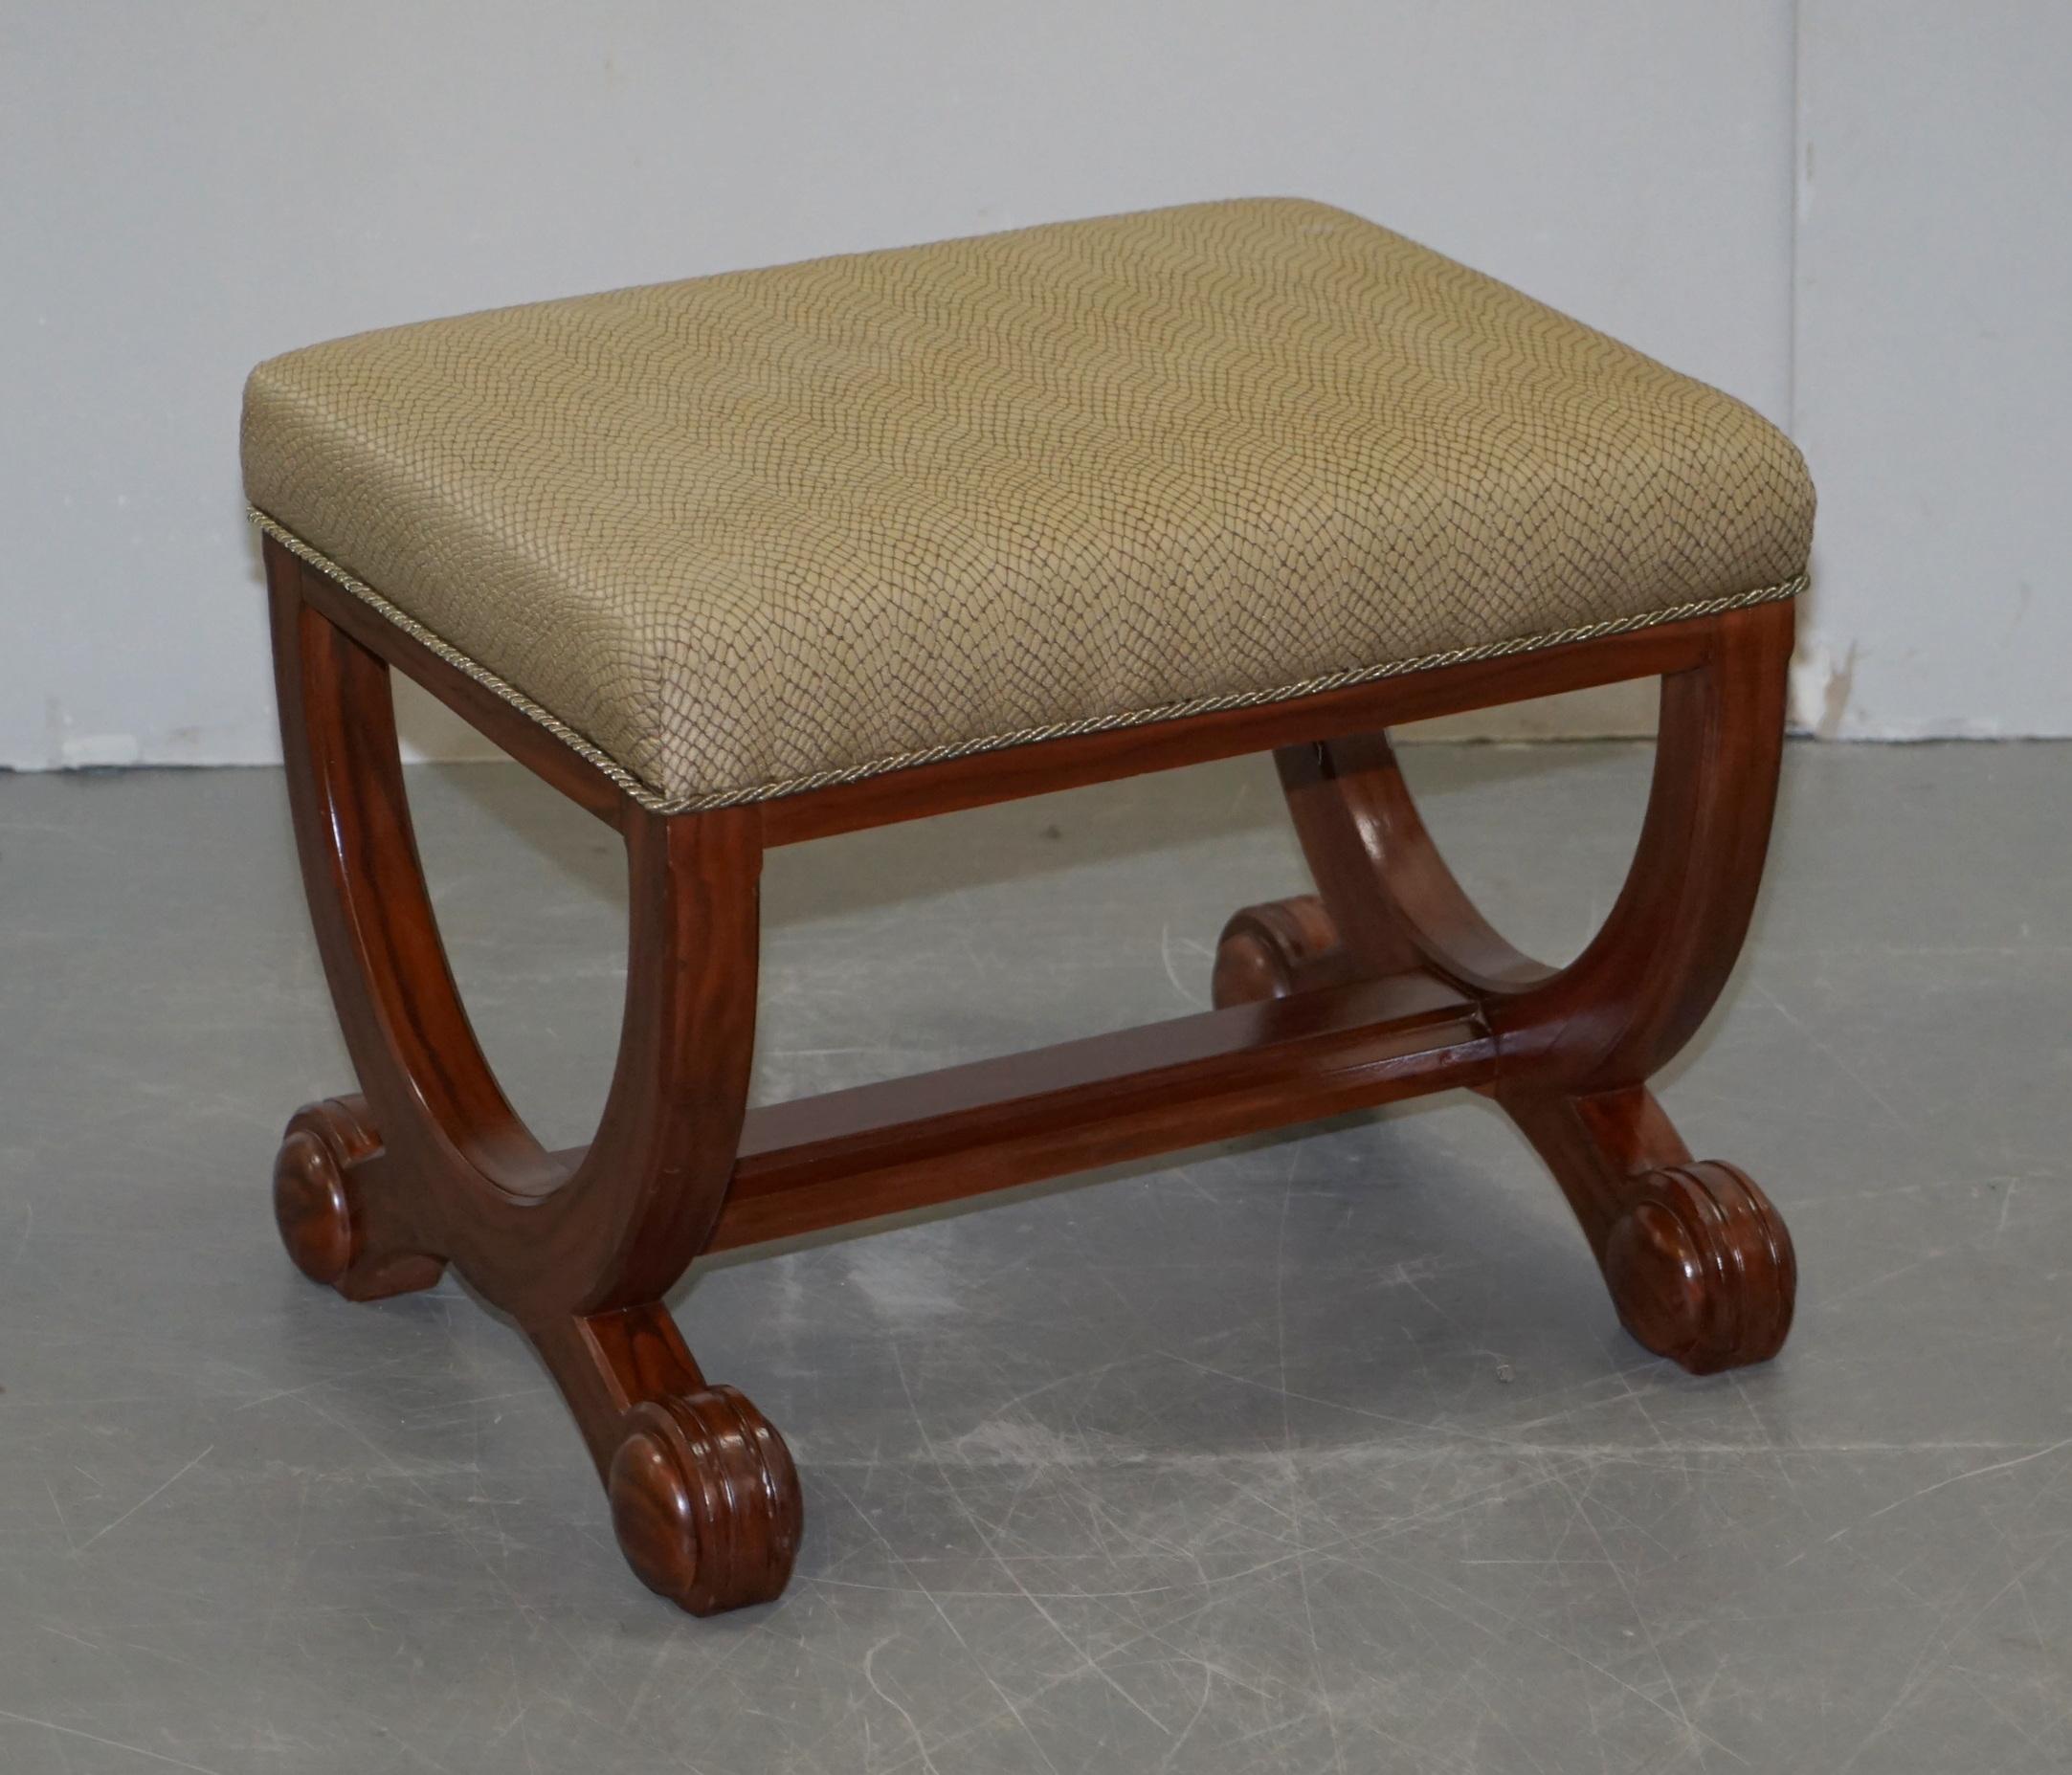 We are delighted to offer for sale this pair of regency style large footstools or bench seats with lovely curved frames

These are nicely made modern stools designed to look 200+ years old. They have faux mahogany painted frames which have a